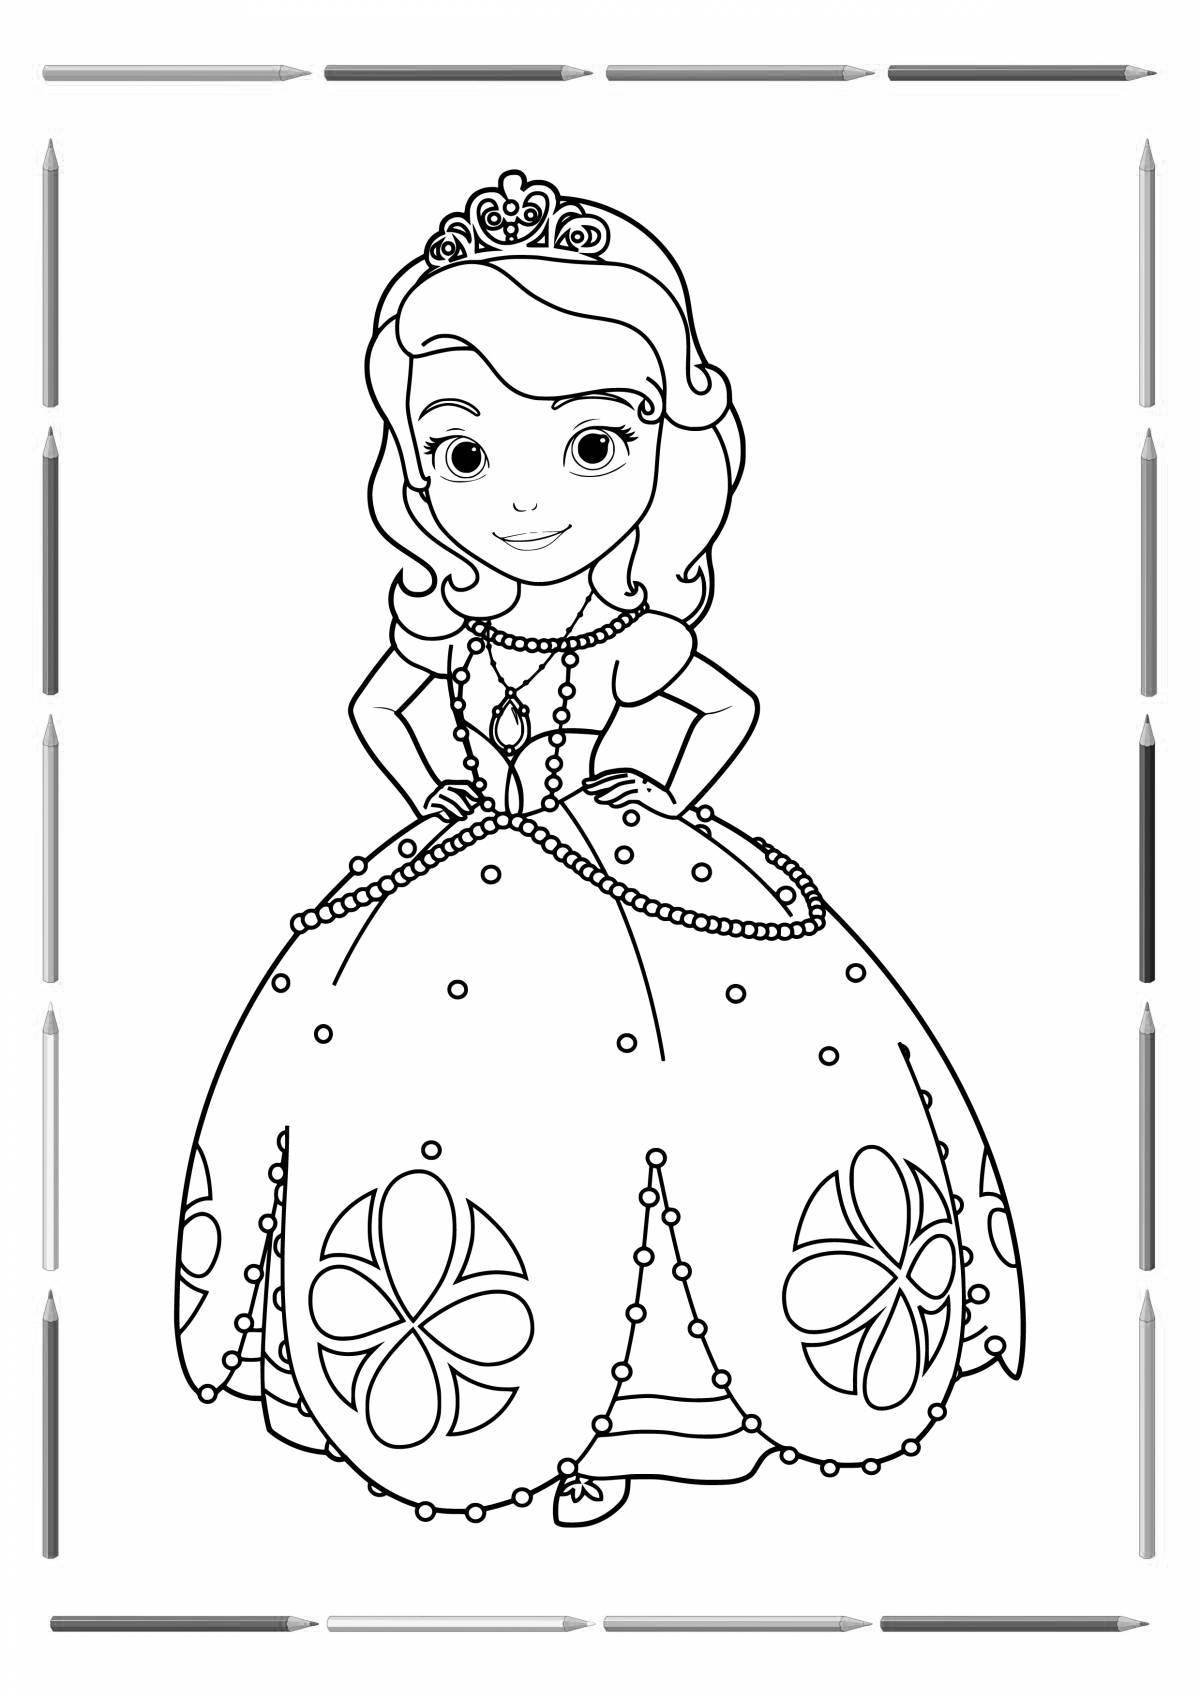 A wonderful coloring book for girls princesses 3-4 years old